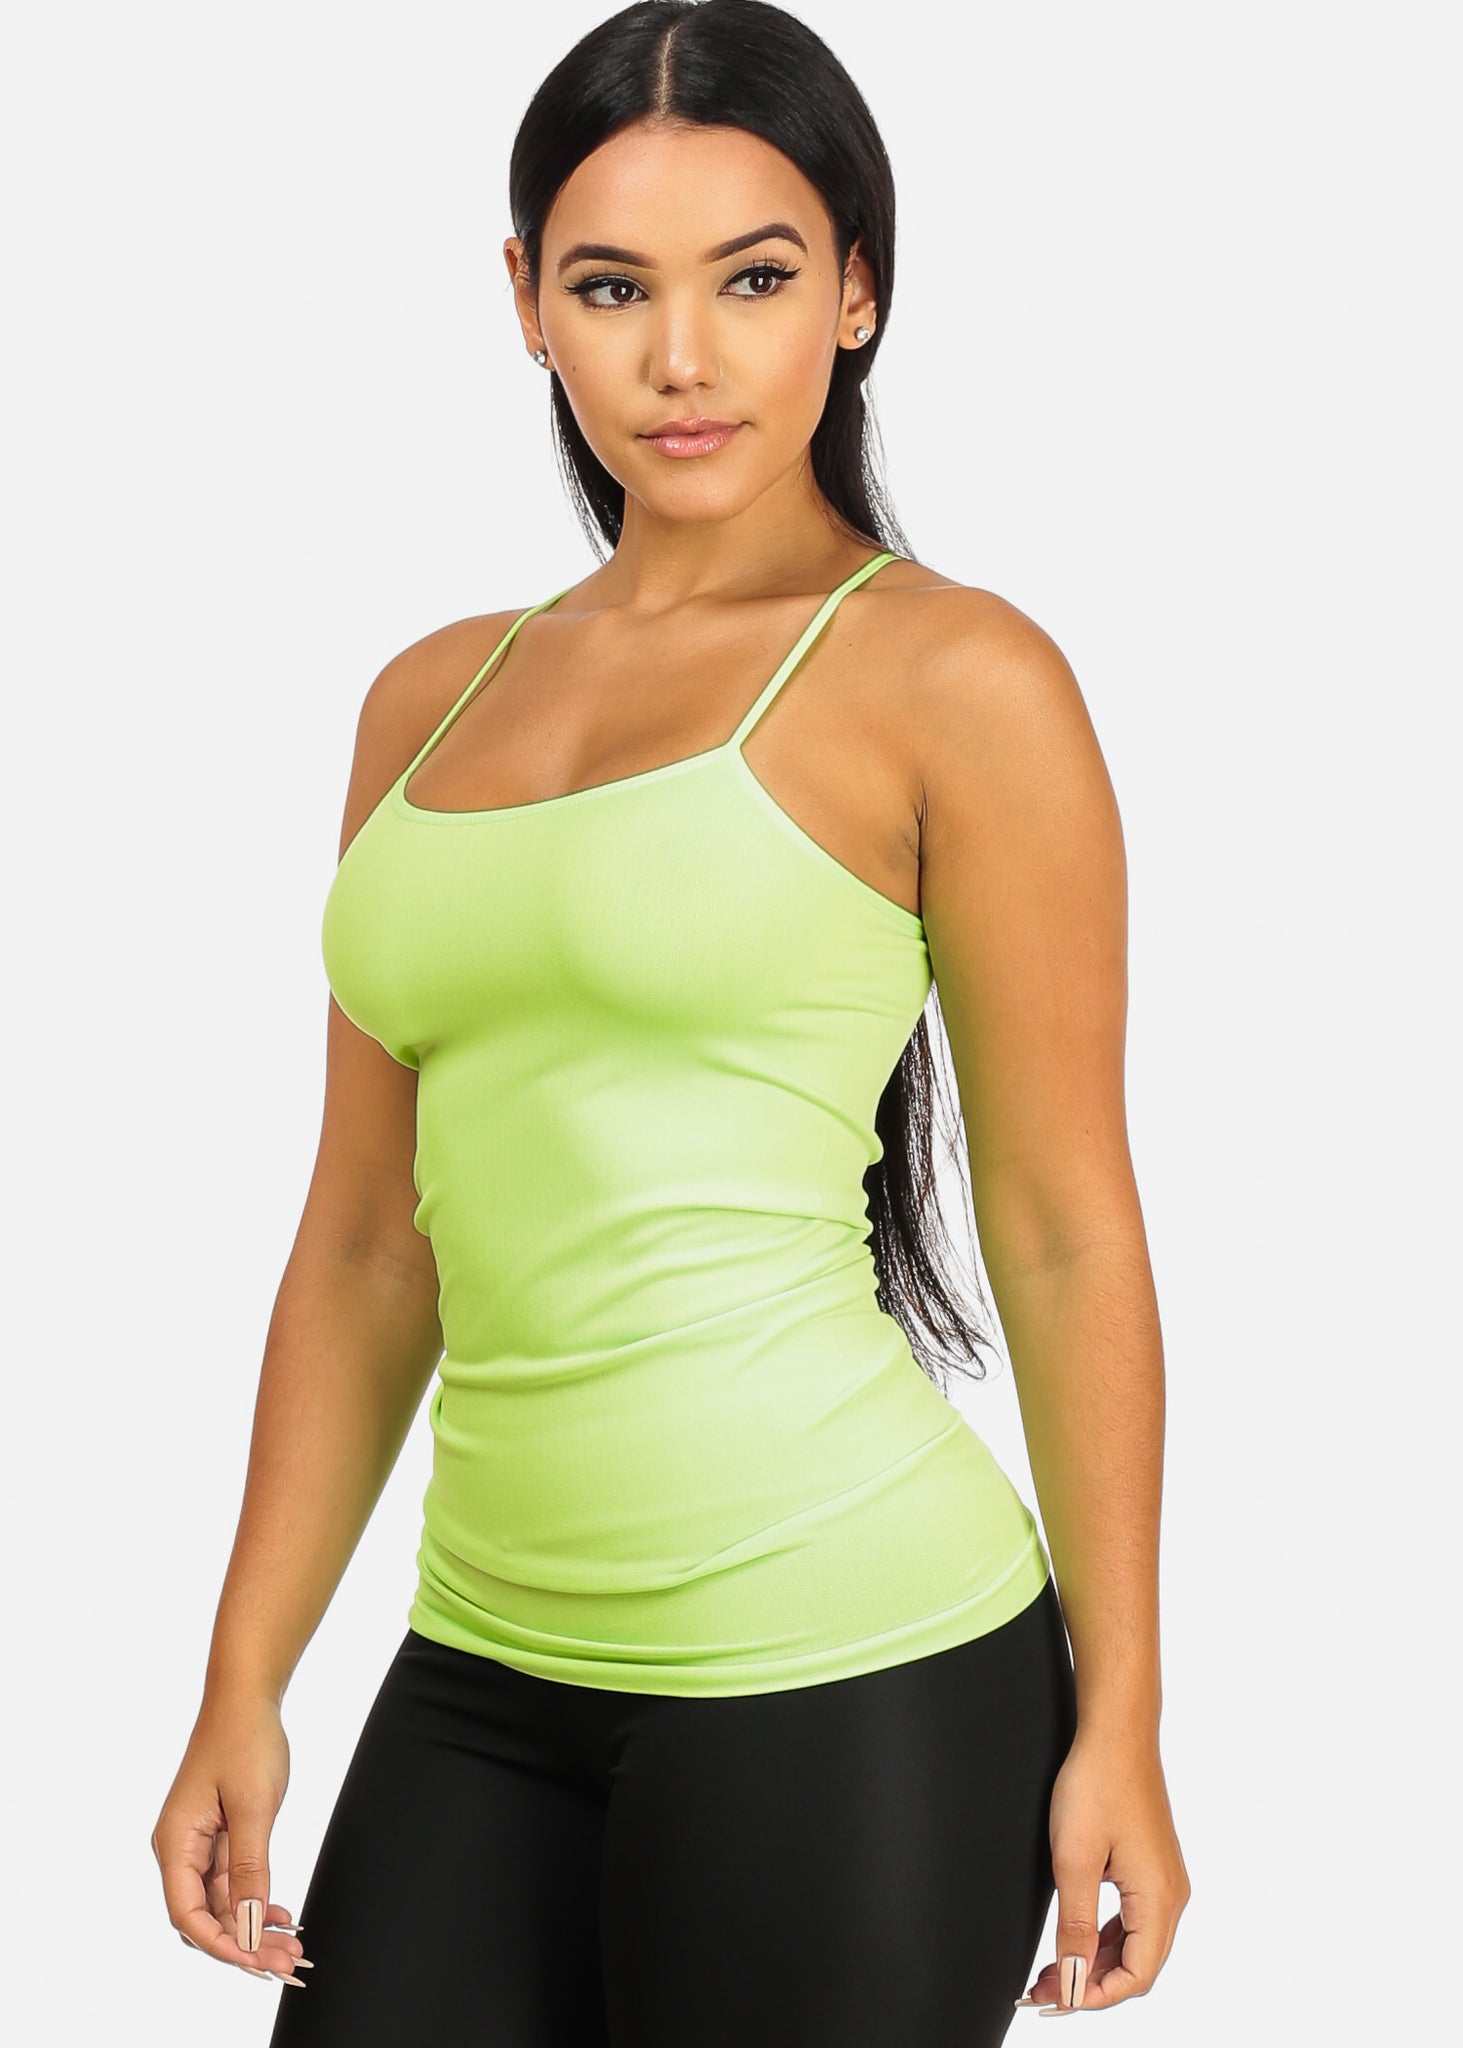 Women's Spaghetti Strap Neon Yellow Color Sleeveless Top T-03R – One Size  Fits